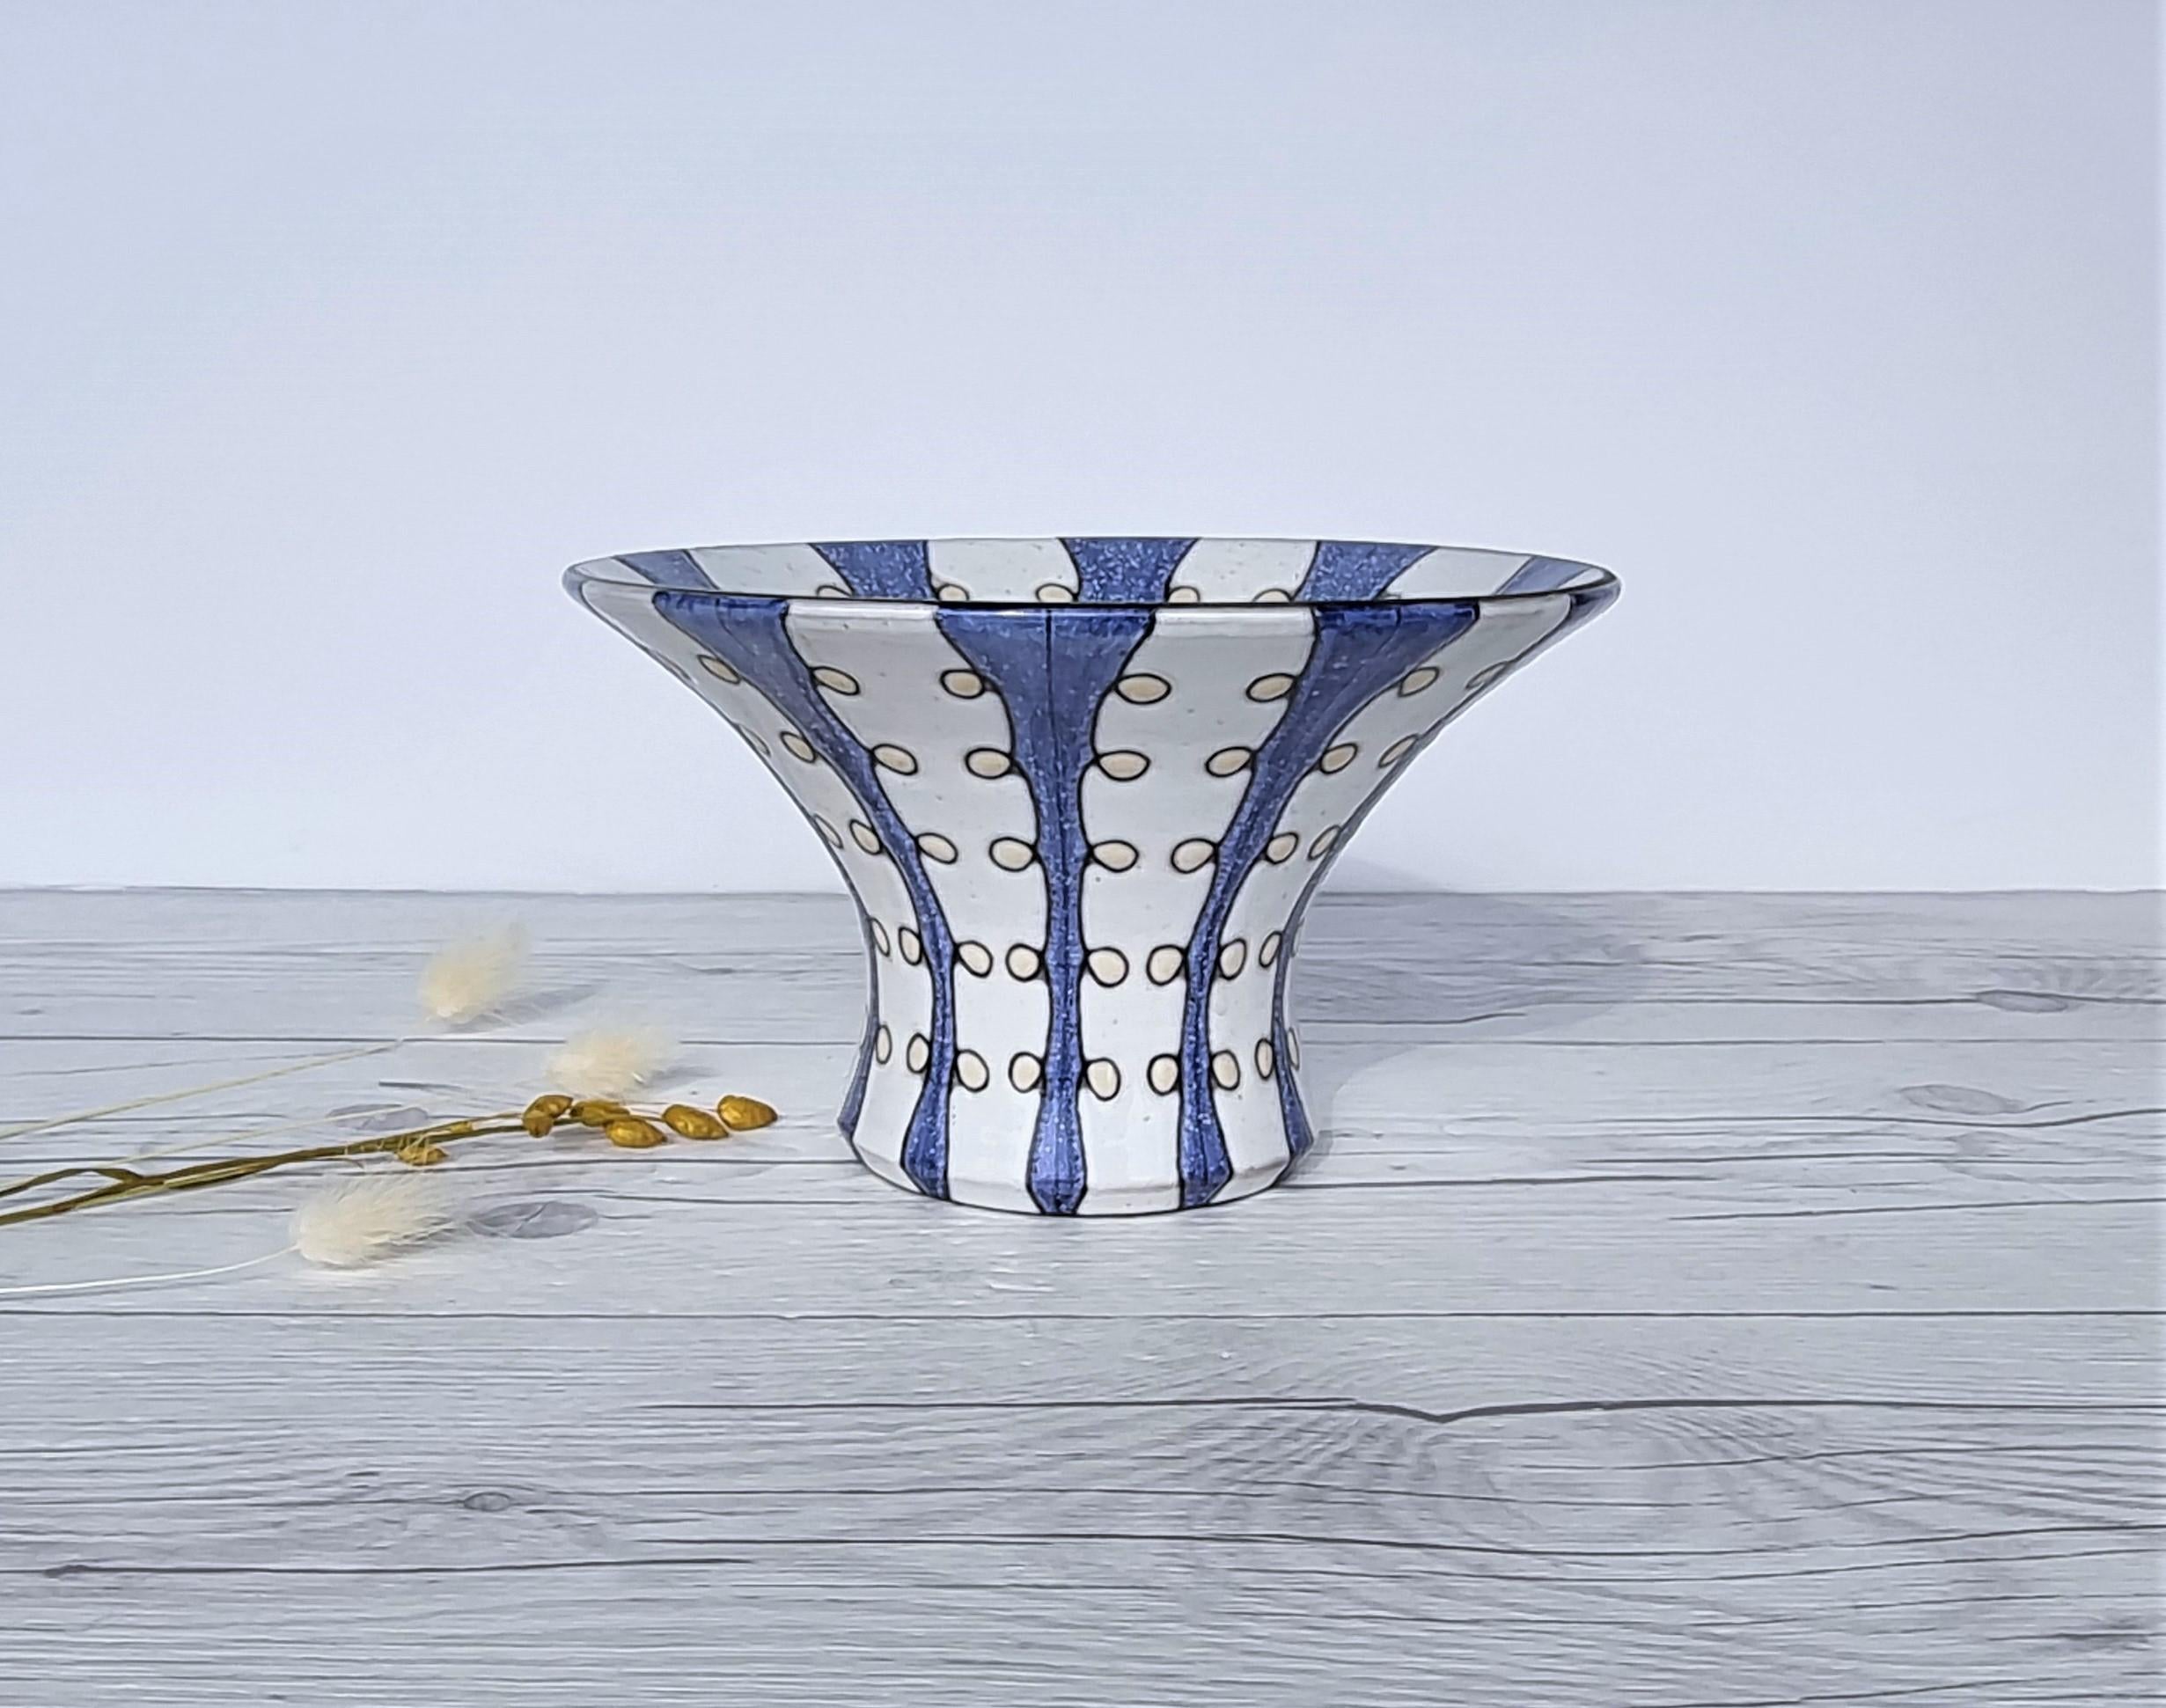 This delicious work of Swedish Mid-Century Modern design is by Mari Simmulson (b. 1911- d. 2000) for Upsala Ekeby. Simmulson was a celebrated Swedish ceramics designer and ceramicist, known for many series she designed at Upsala Ekeby which went on